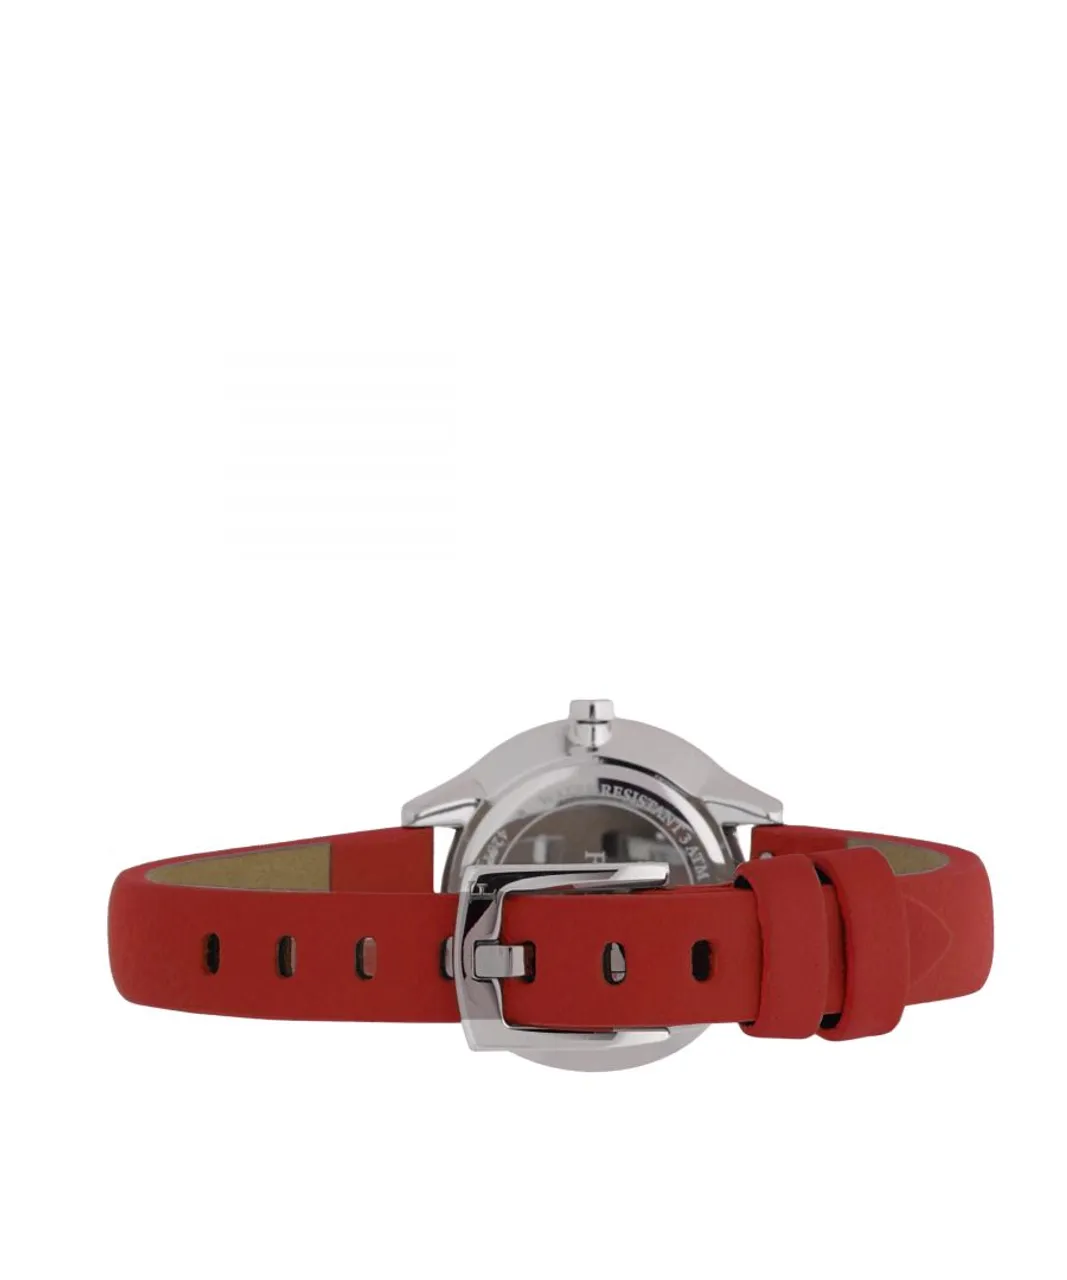 Furla Womens R4251102507 Watch - Red - One Size